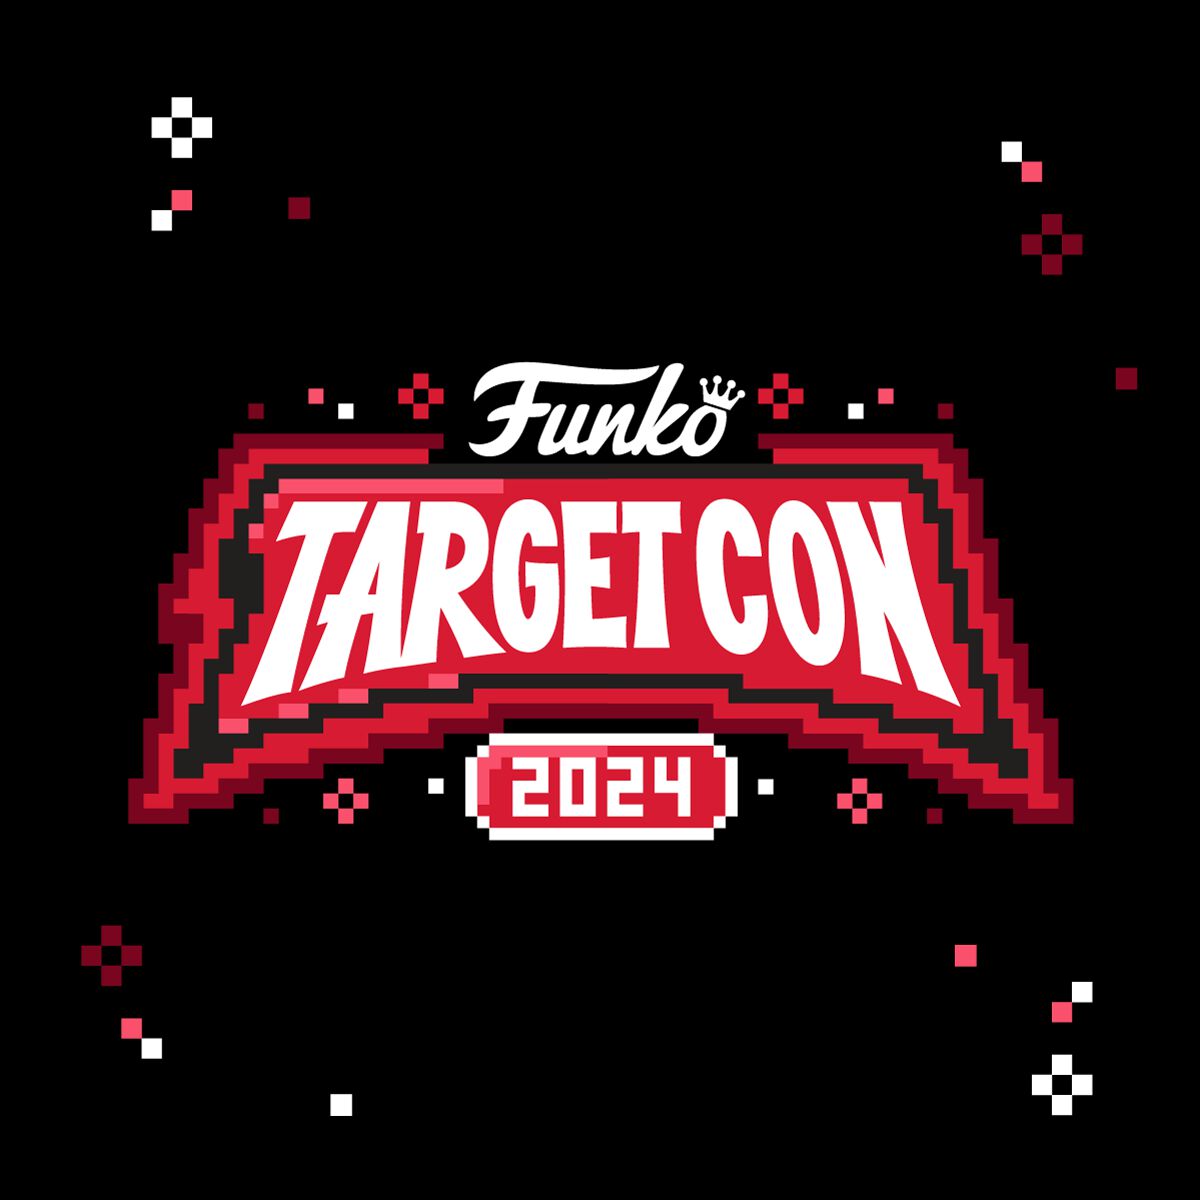 Last Chance to Collect Target Con Exclusives